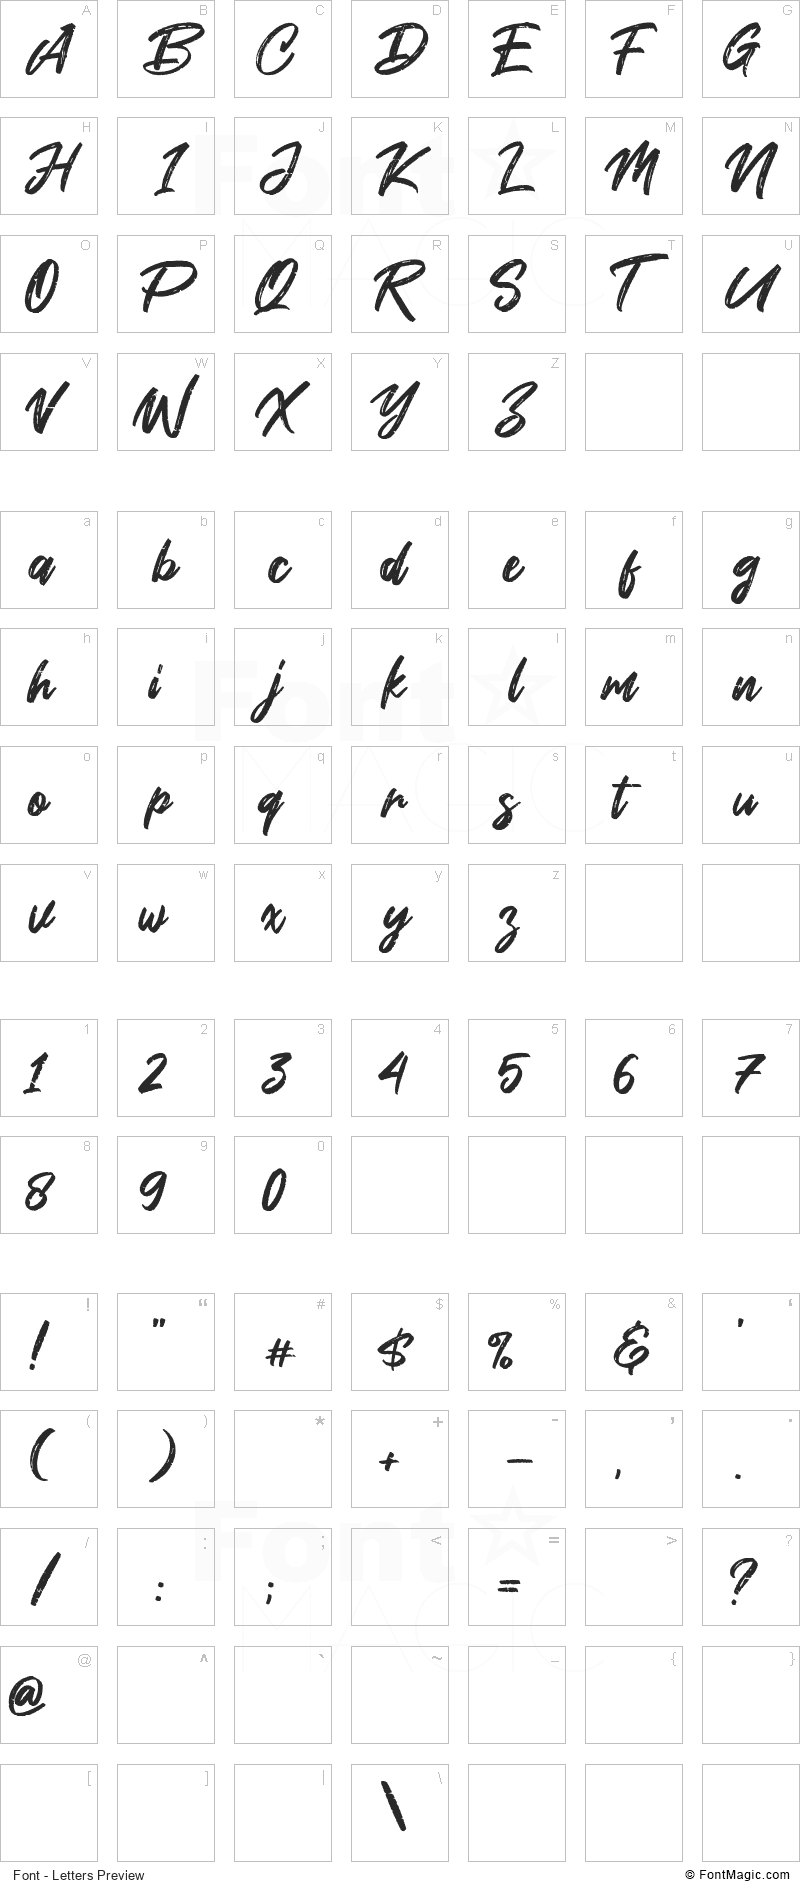 Smoke Attack Font - All Latters Preview Chart